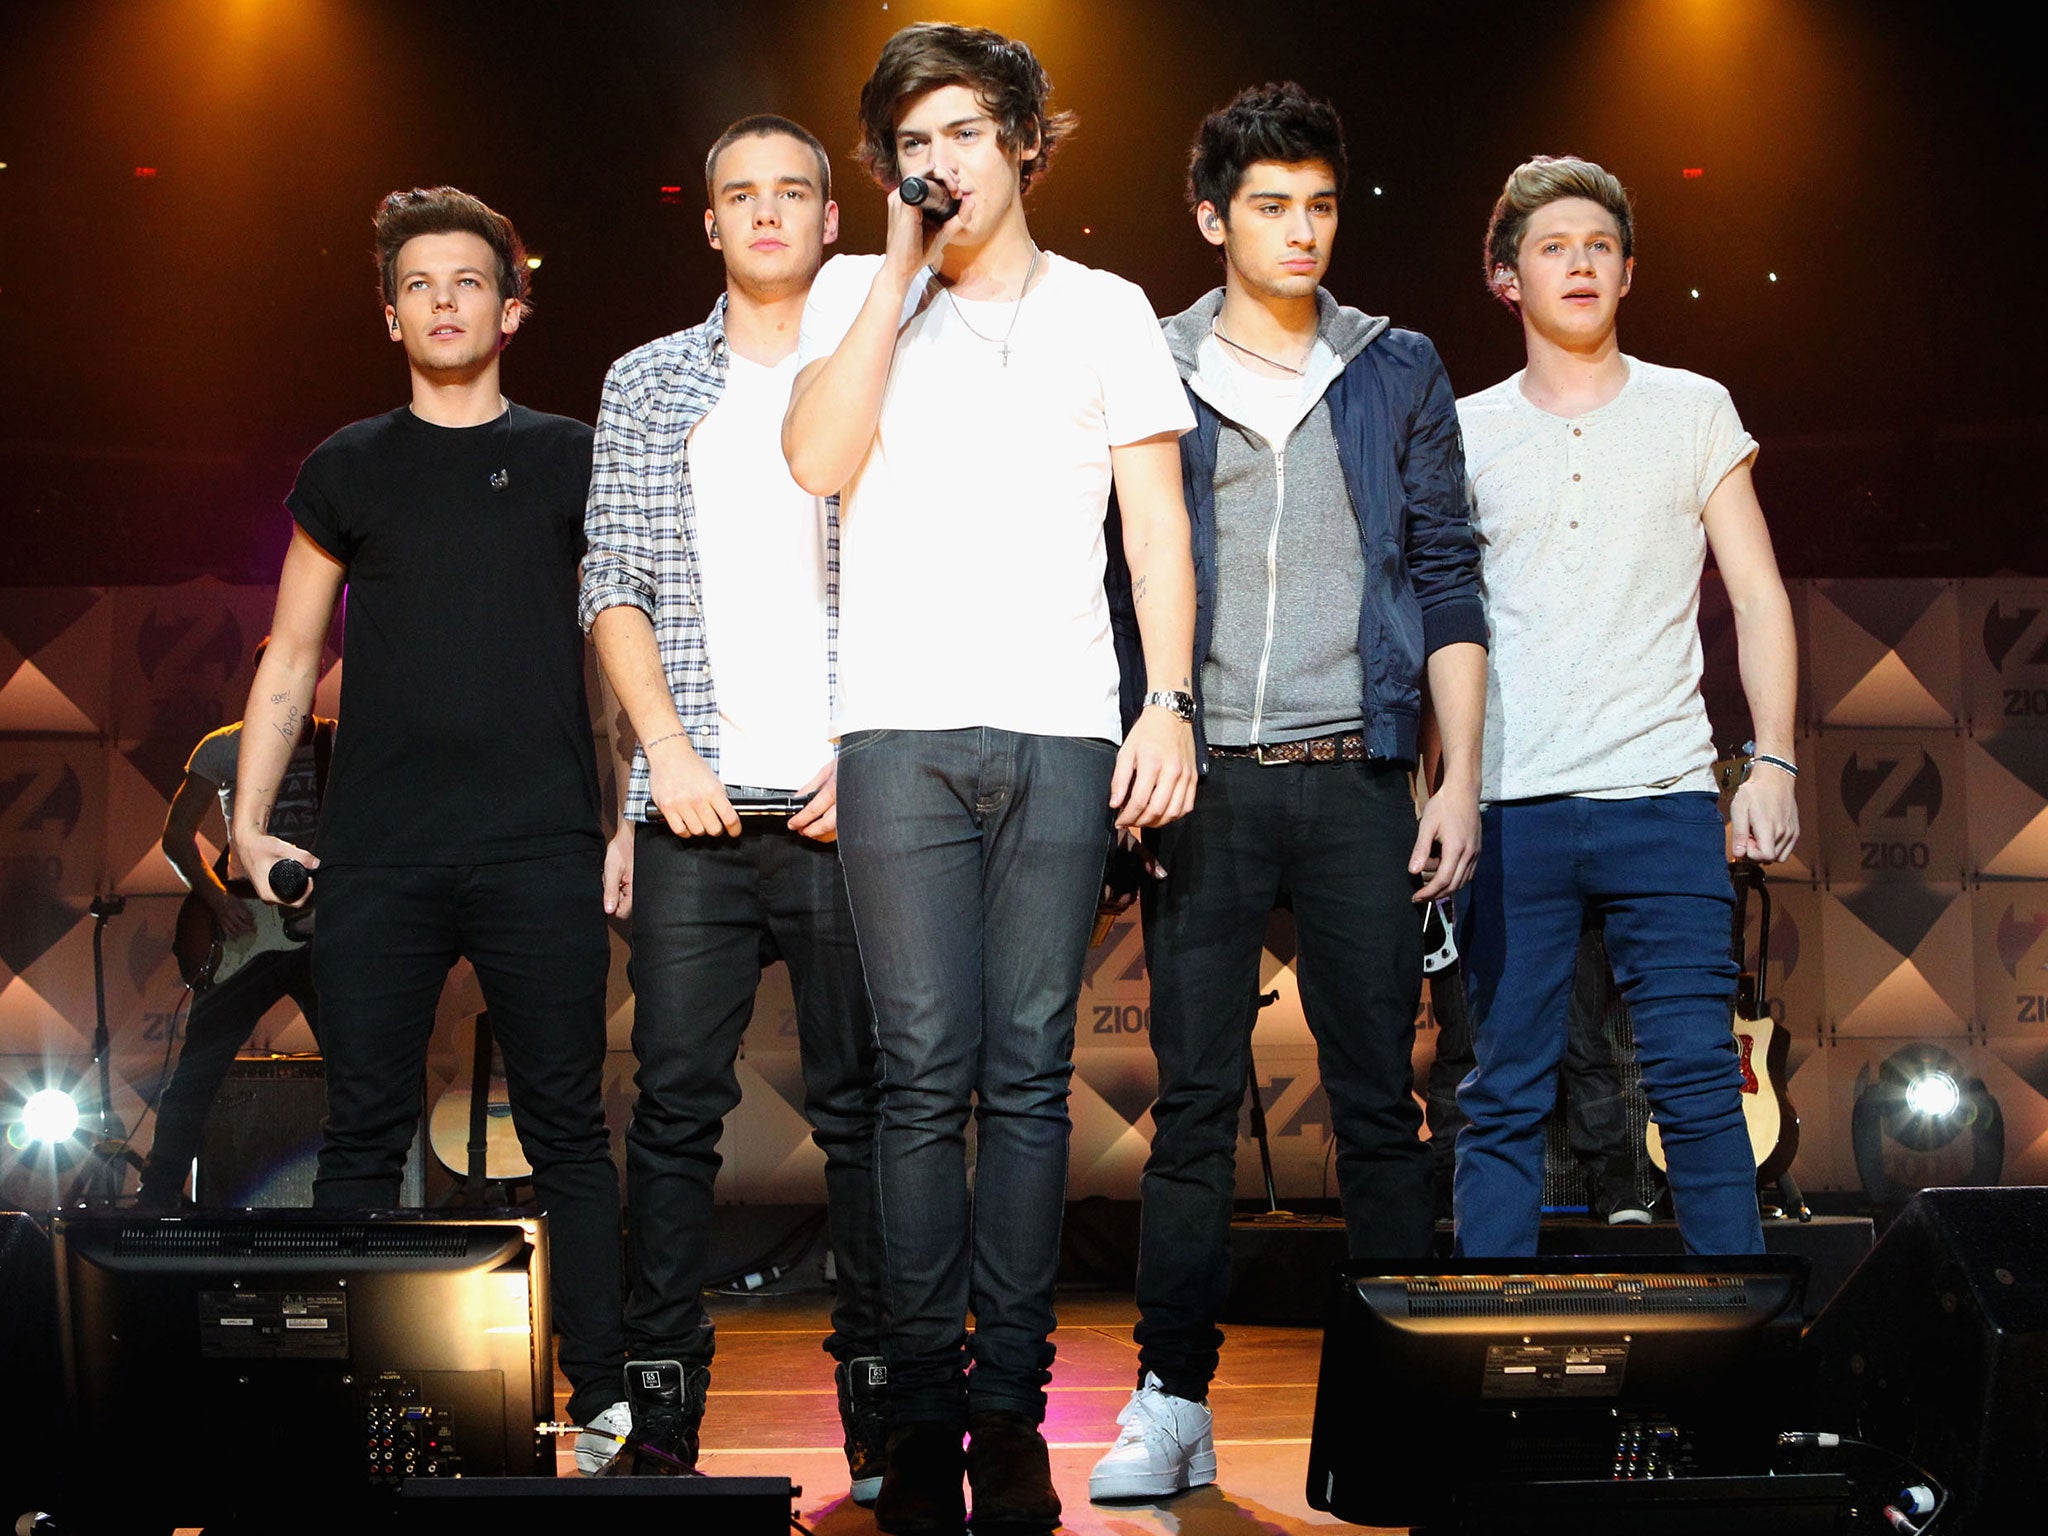 Louis Tomlinson, Liam Payne, Harry Styles, Zayn Malik and Niall Horan of One Direction on stage